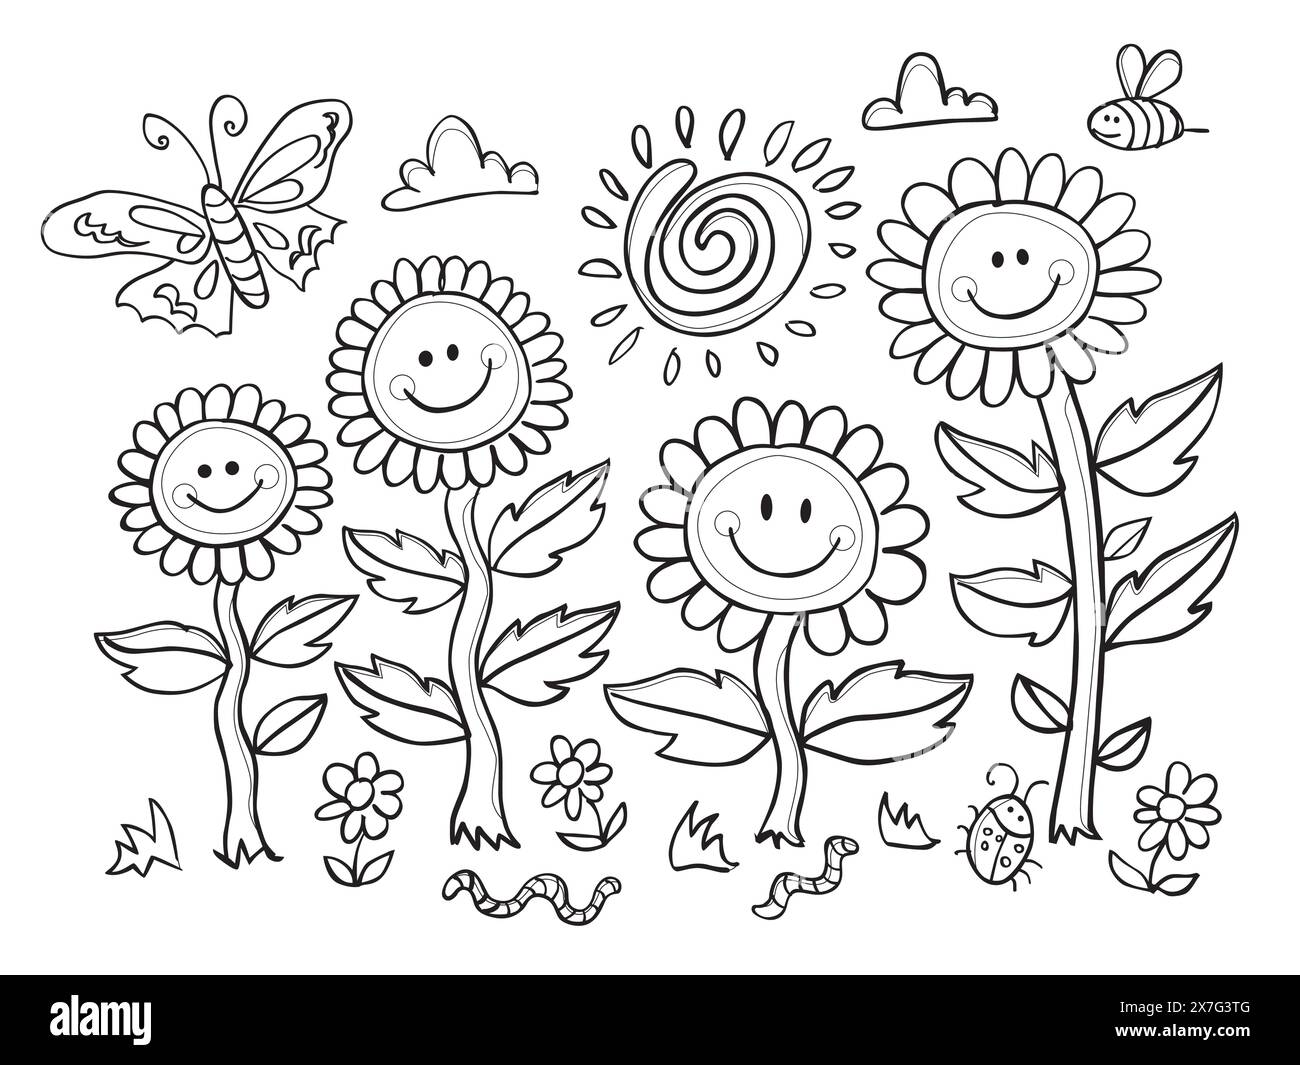 Vector black and white coloring sheet with smiley face flower illustration with sun swirl and moth. Suitable kids coloring activity. Stock Vector